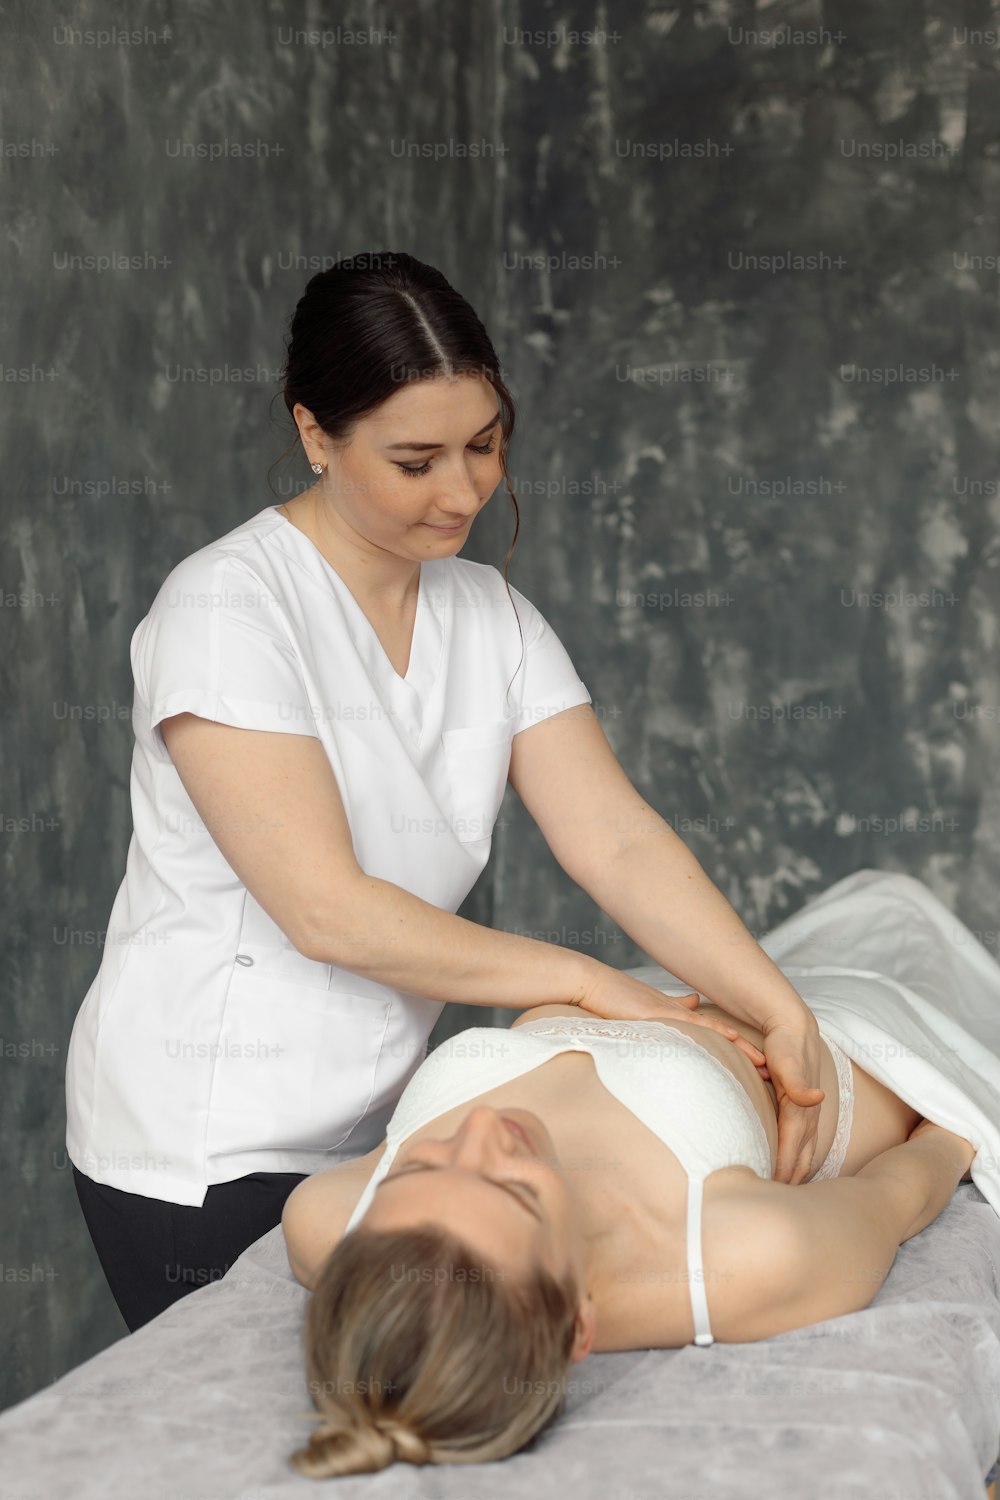 Osteopath in medical cabinet check up ribs of woman lying down on hospital couch in white underwear. Professional specialist appointment and examination. Healthcare and disease treatment concept.